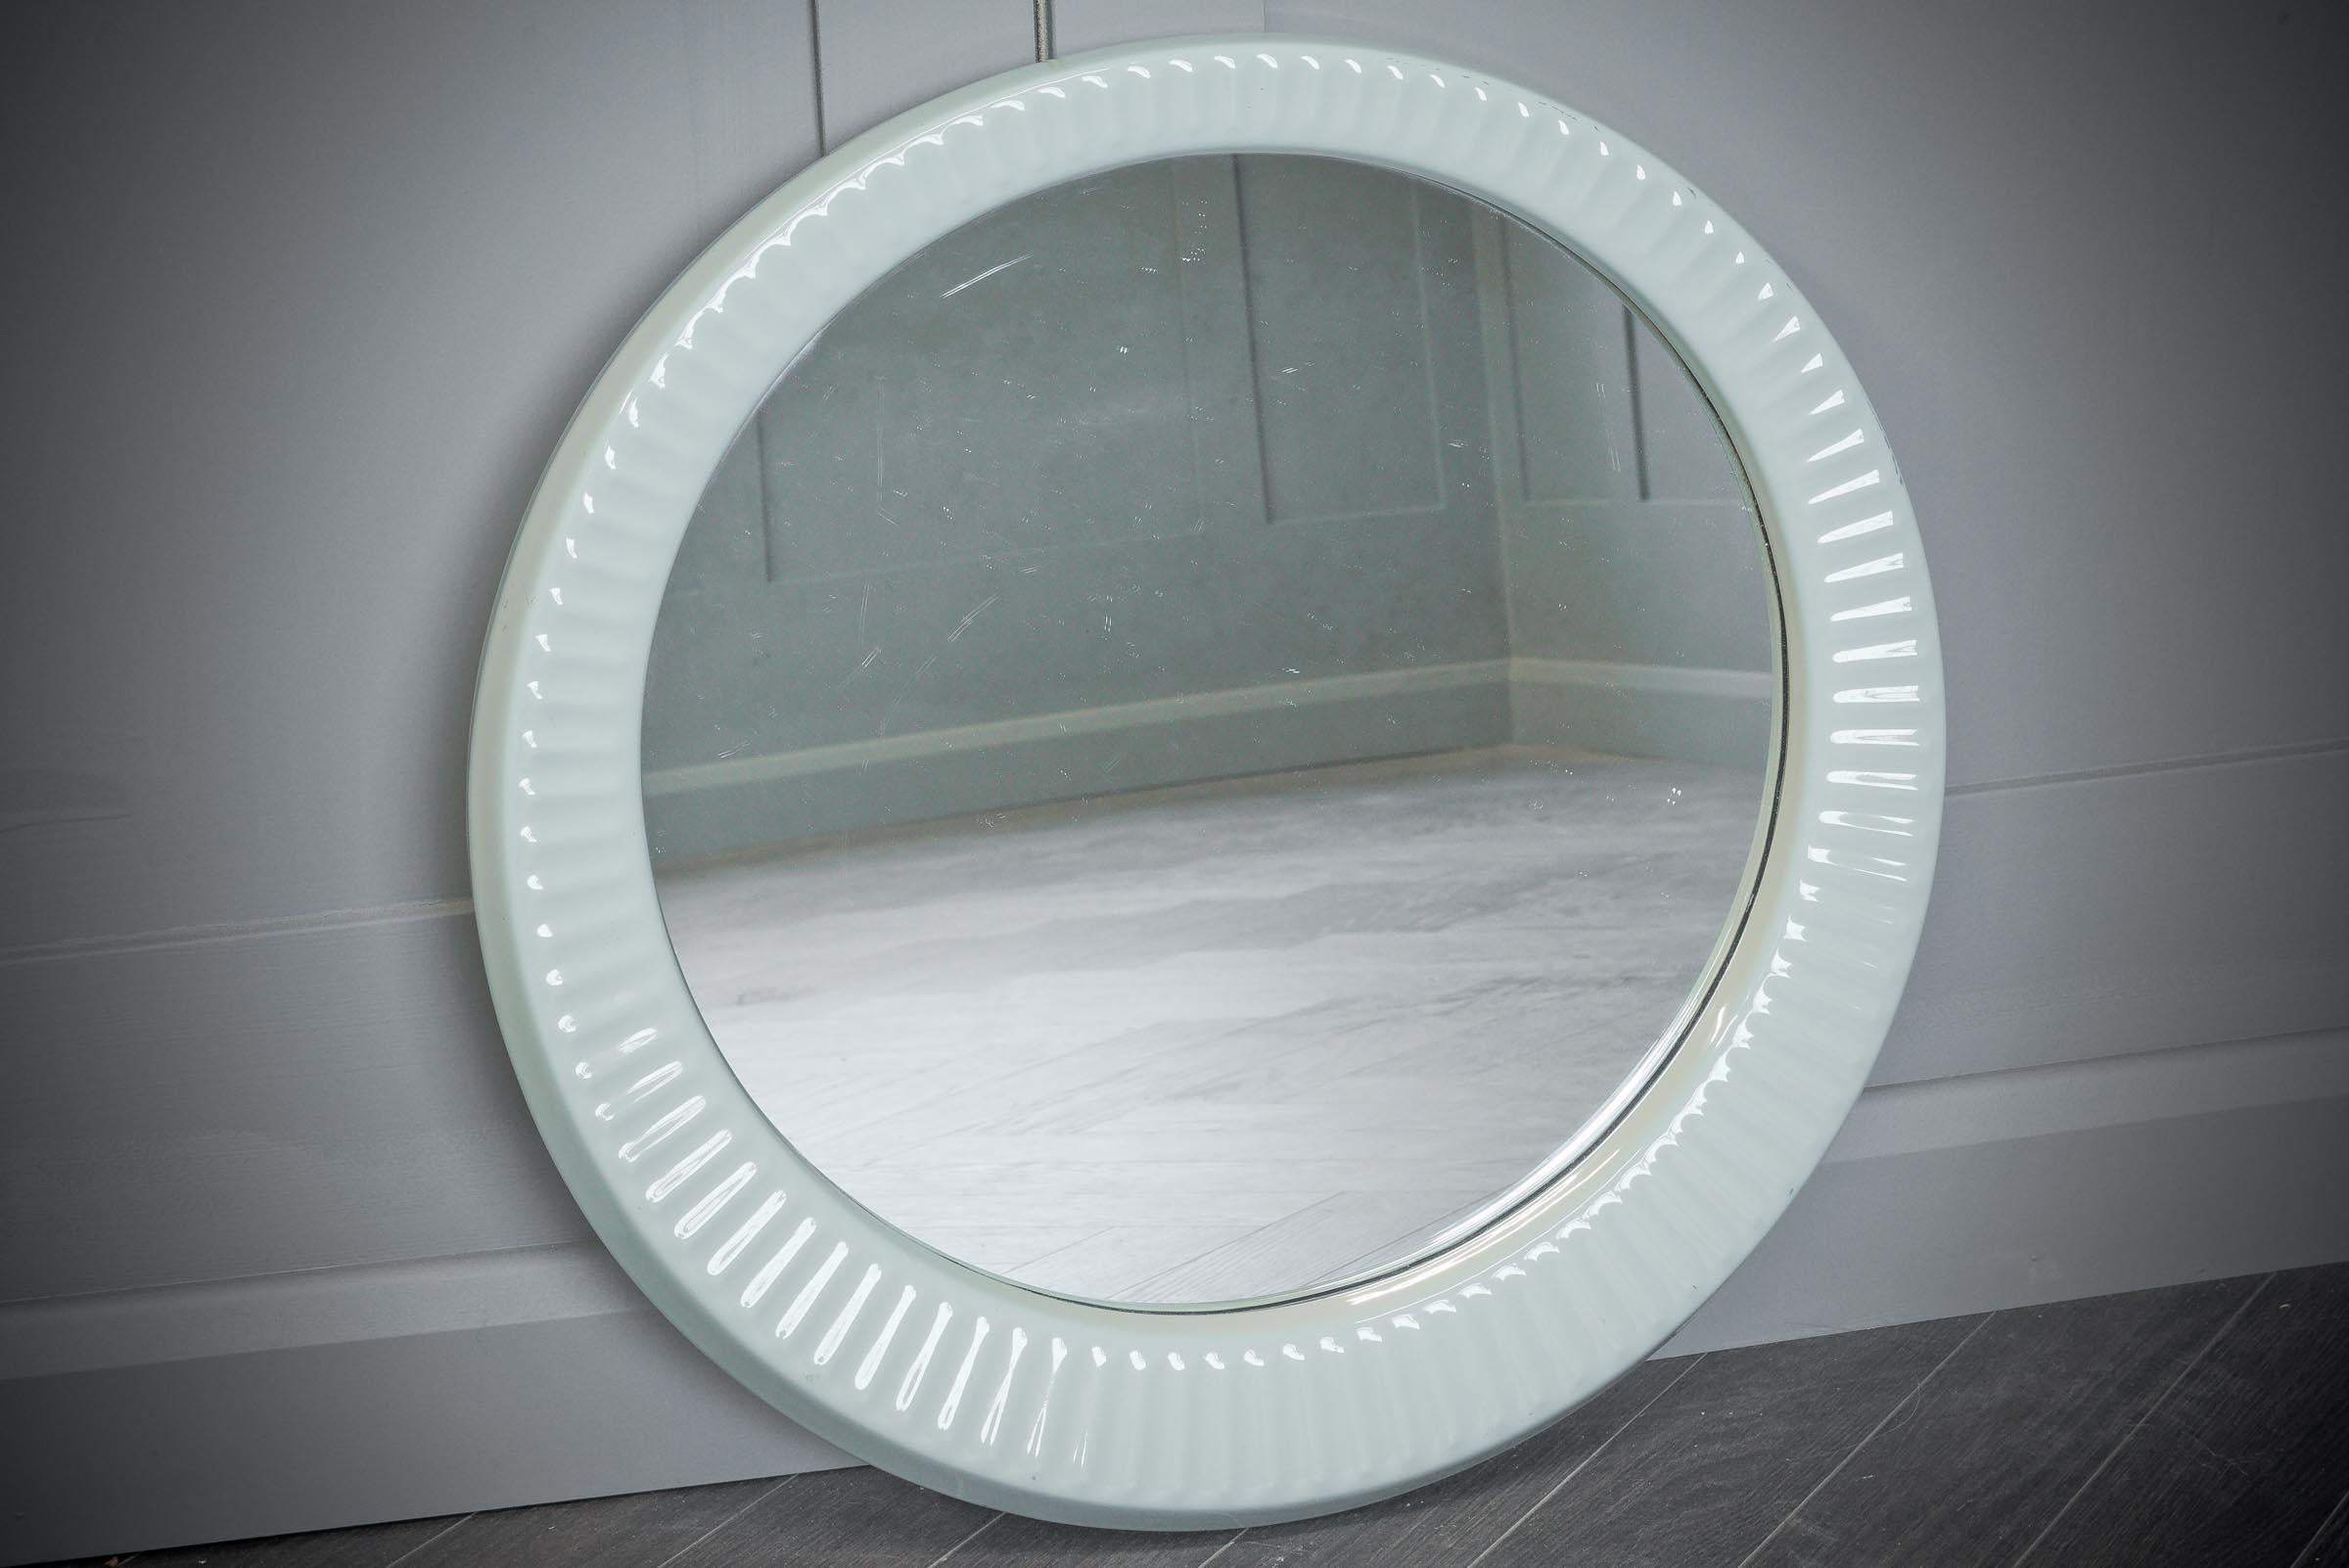 A beautifully retro 1970s antique ceramic framed oval mirror made by Twyfords, perfect for adding character to any bathroom.